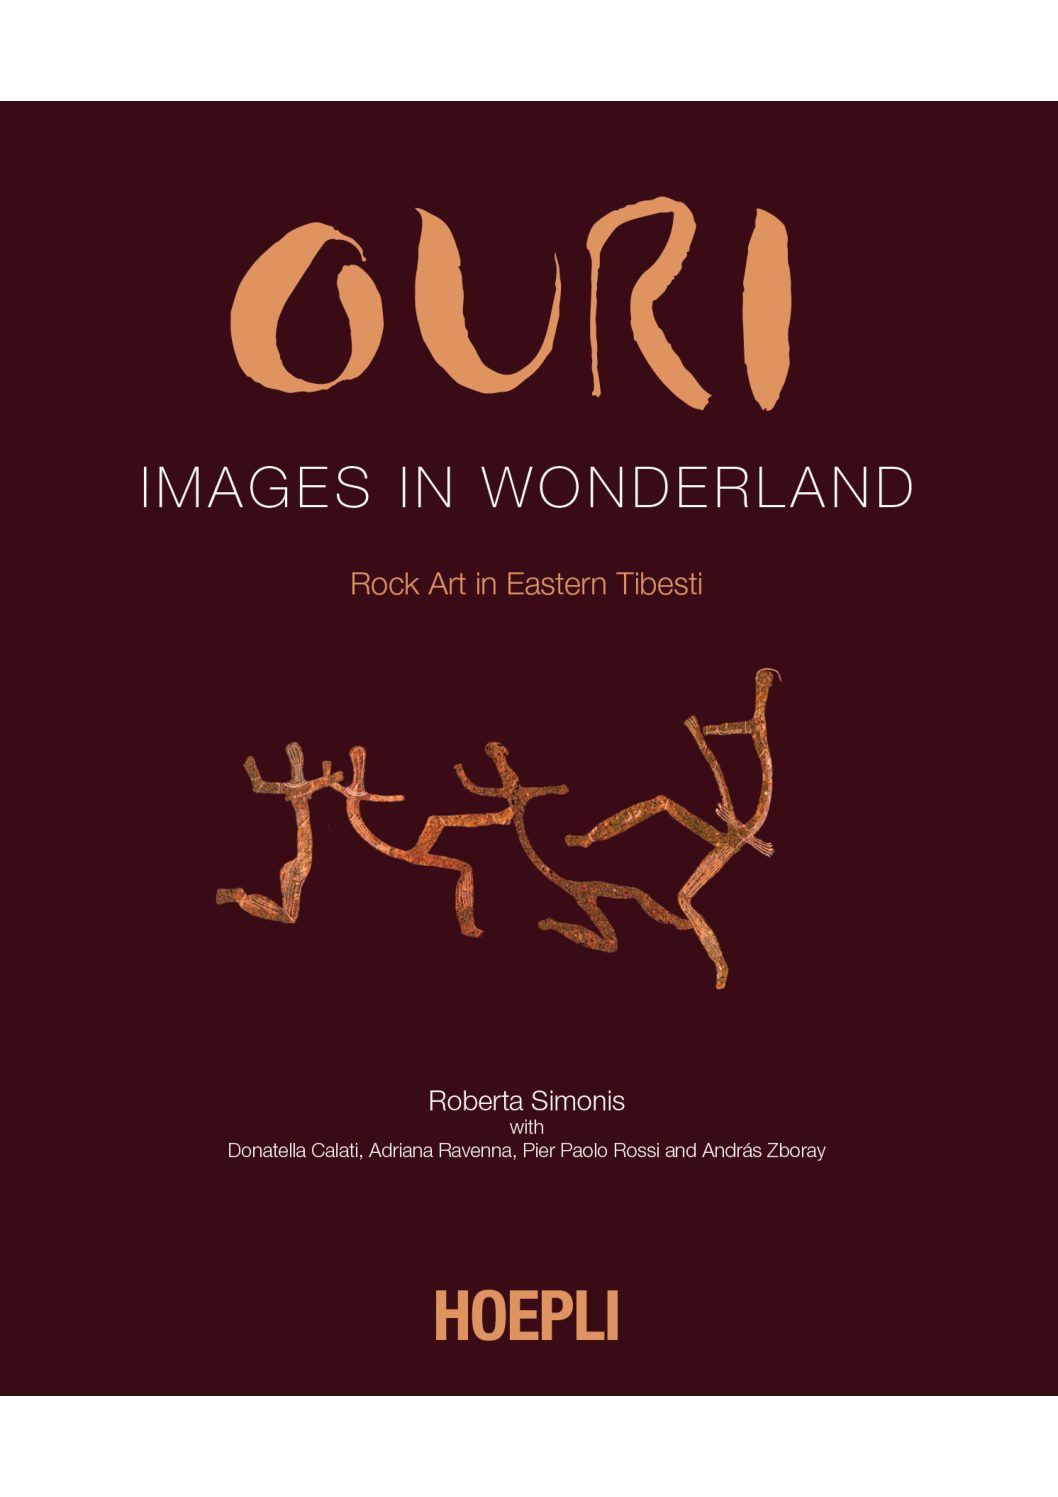 You are currently viewing ARS-INFO n° 960: Publication de «Ouri, Images in Wonderland. Rock Art in Eastern Tibesti»